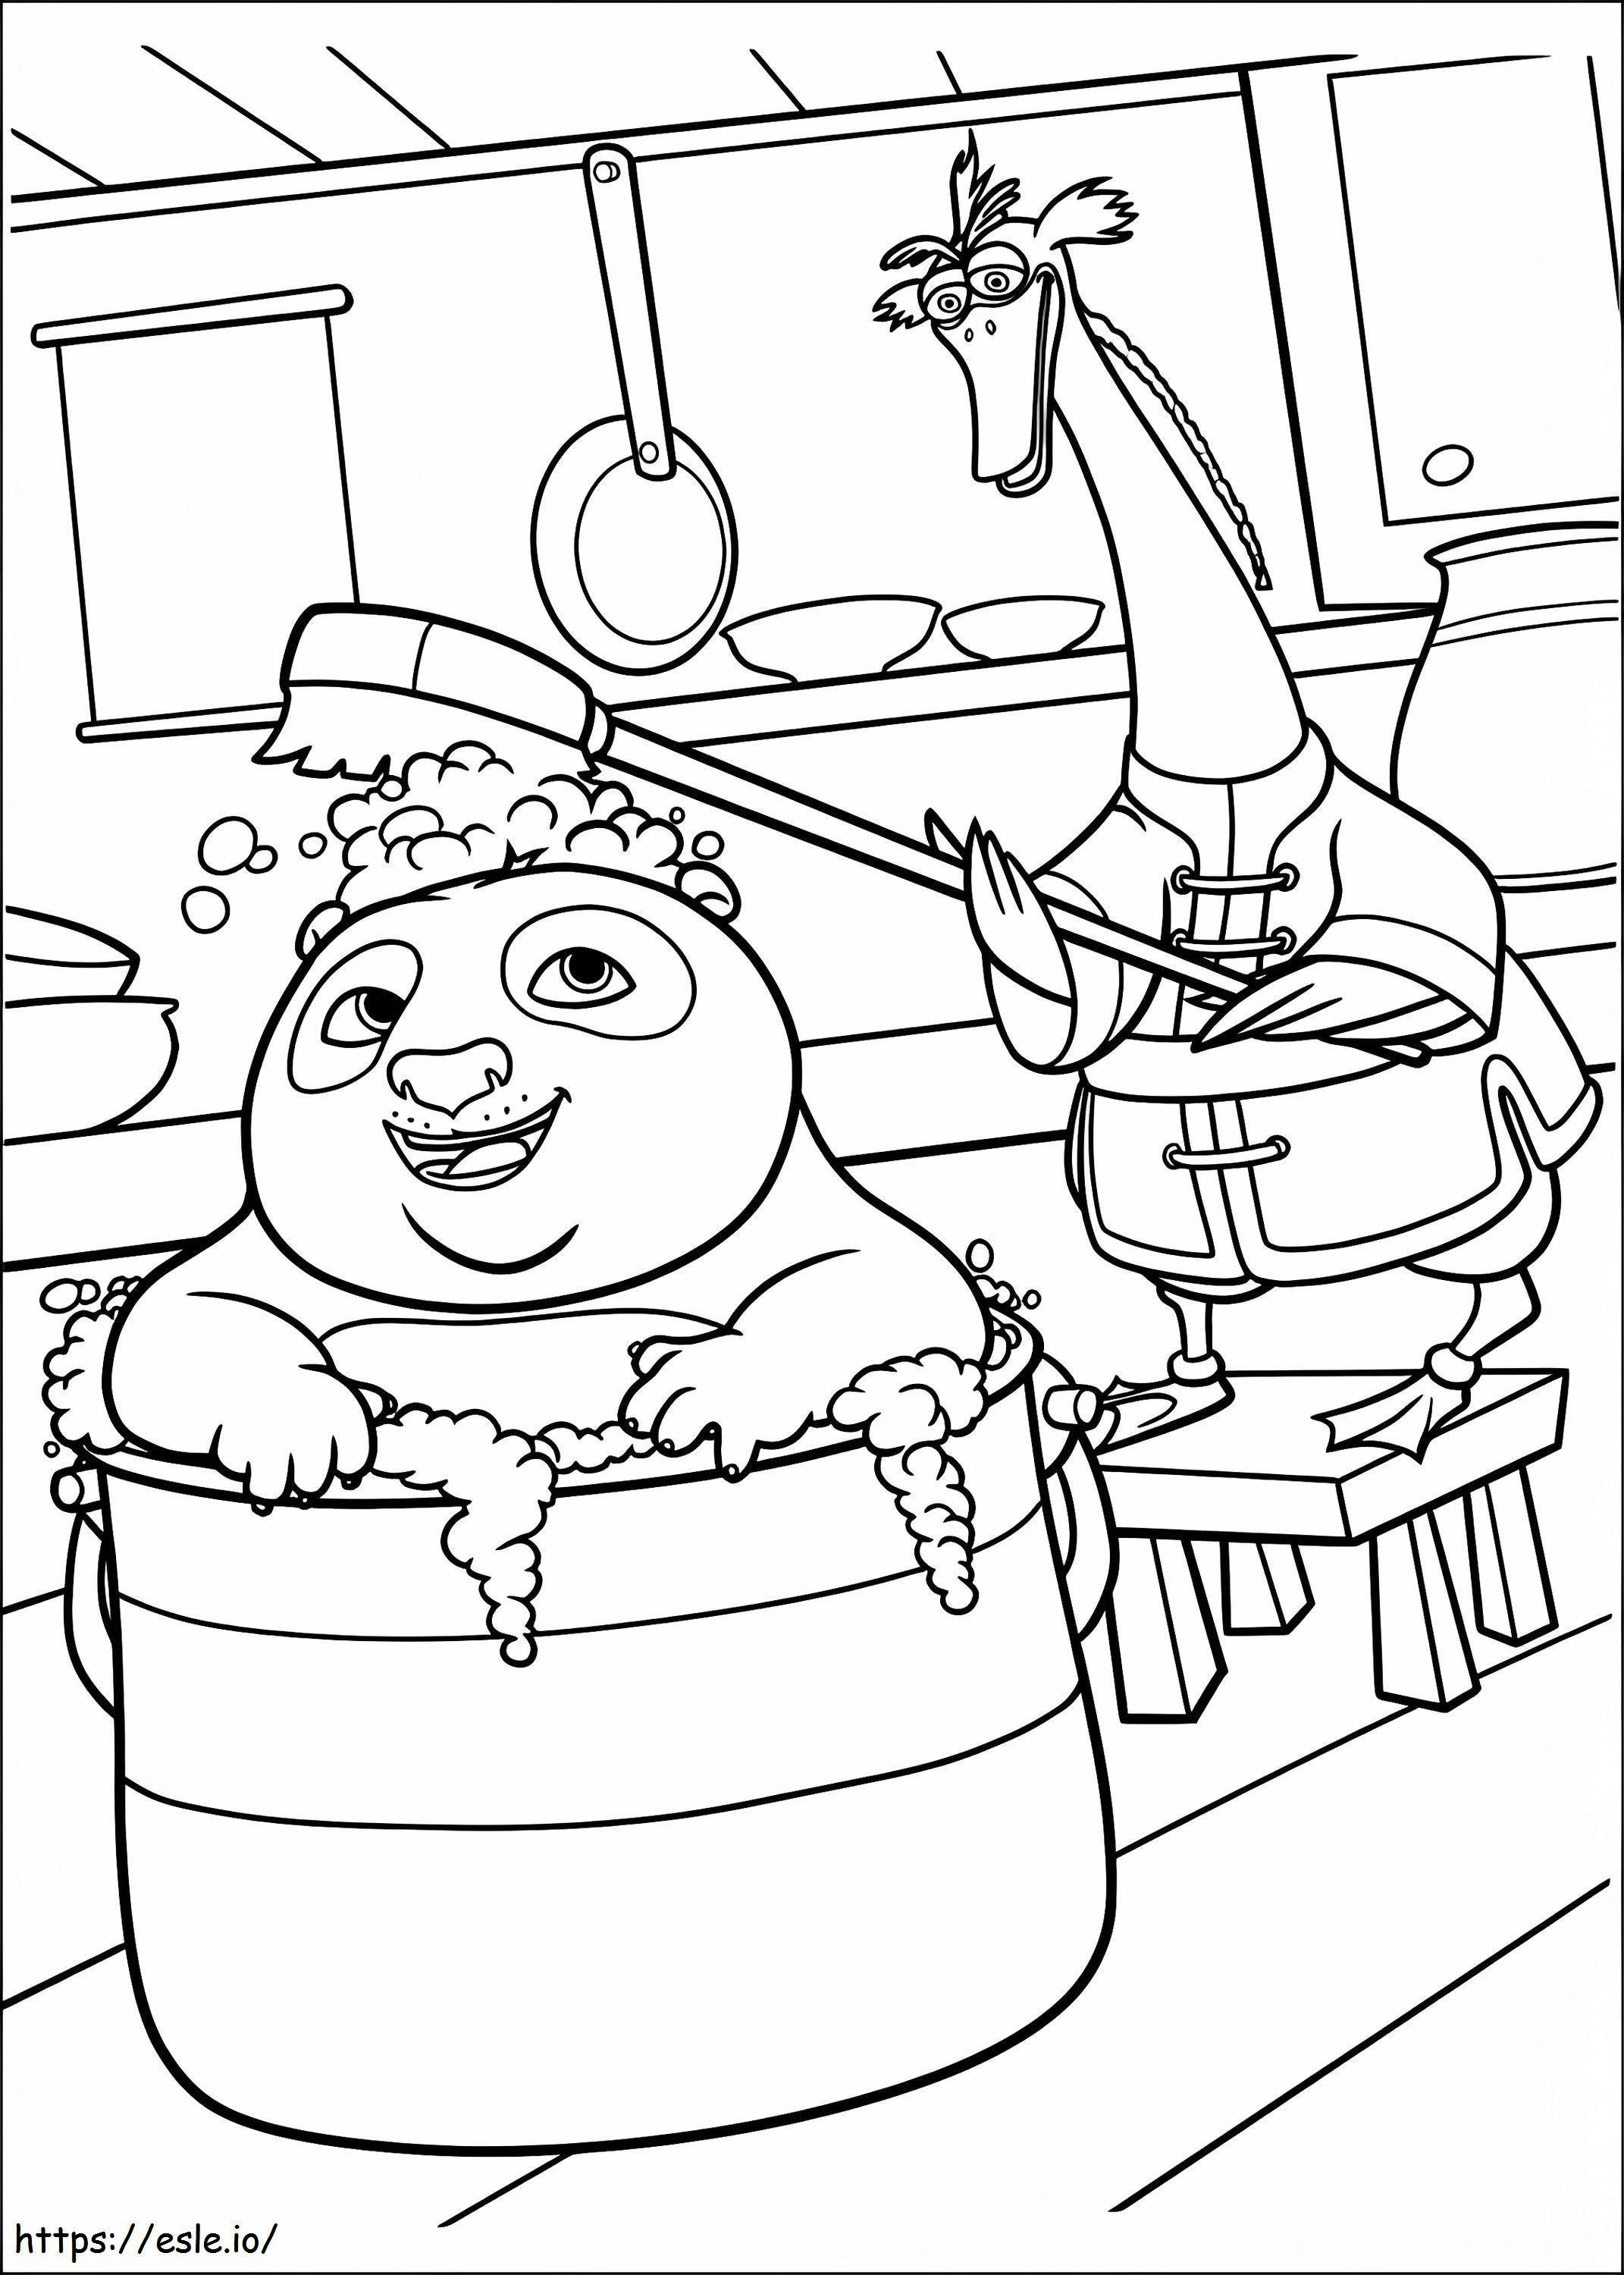 1534474577 Po Taking A Shower A4 coloring page